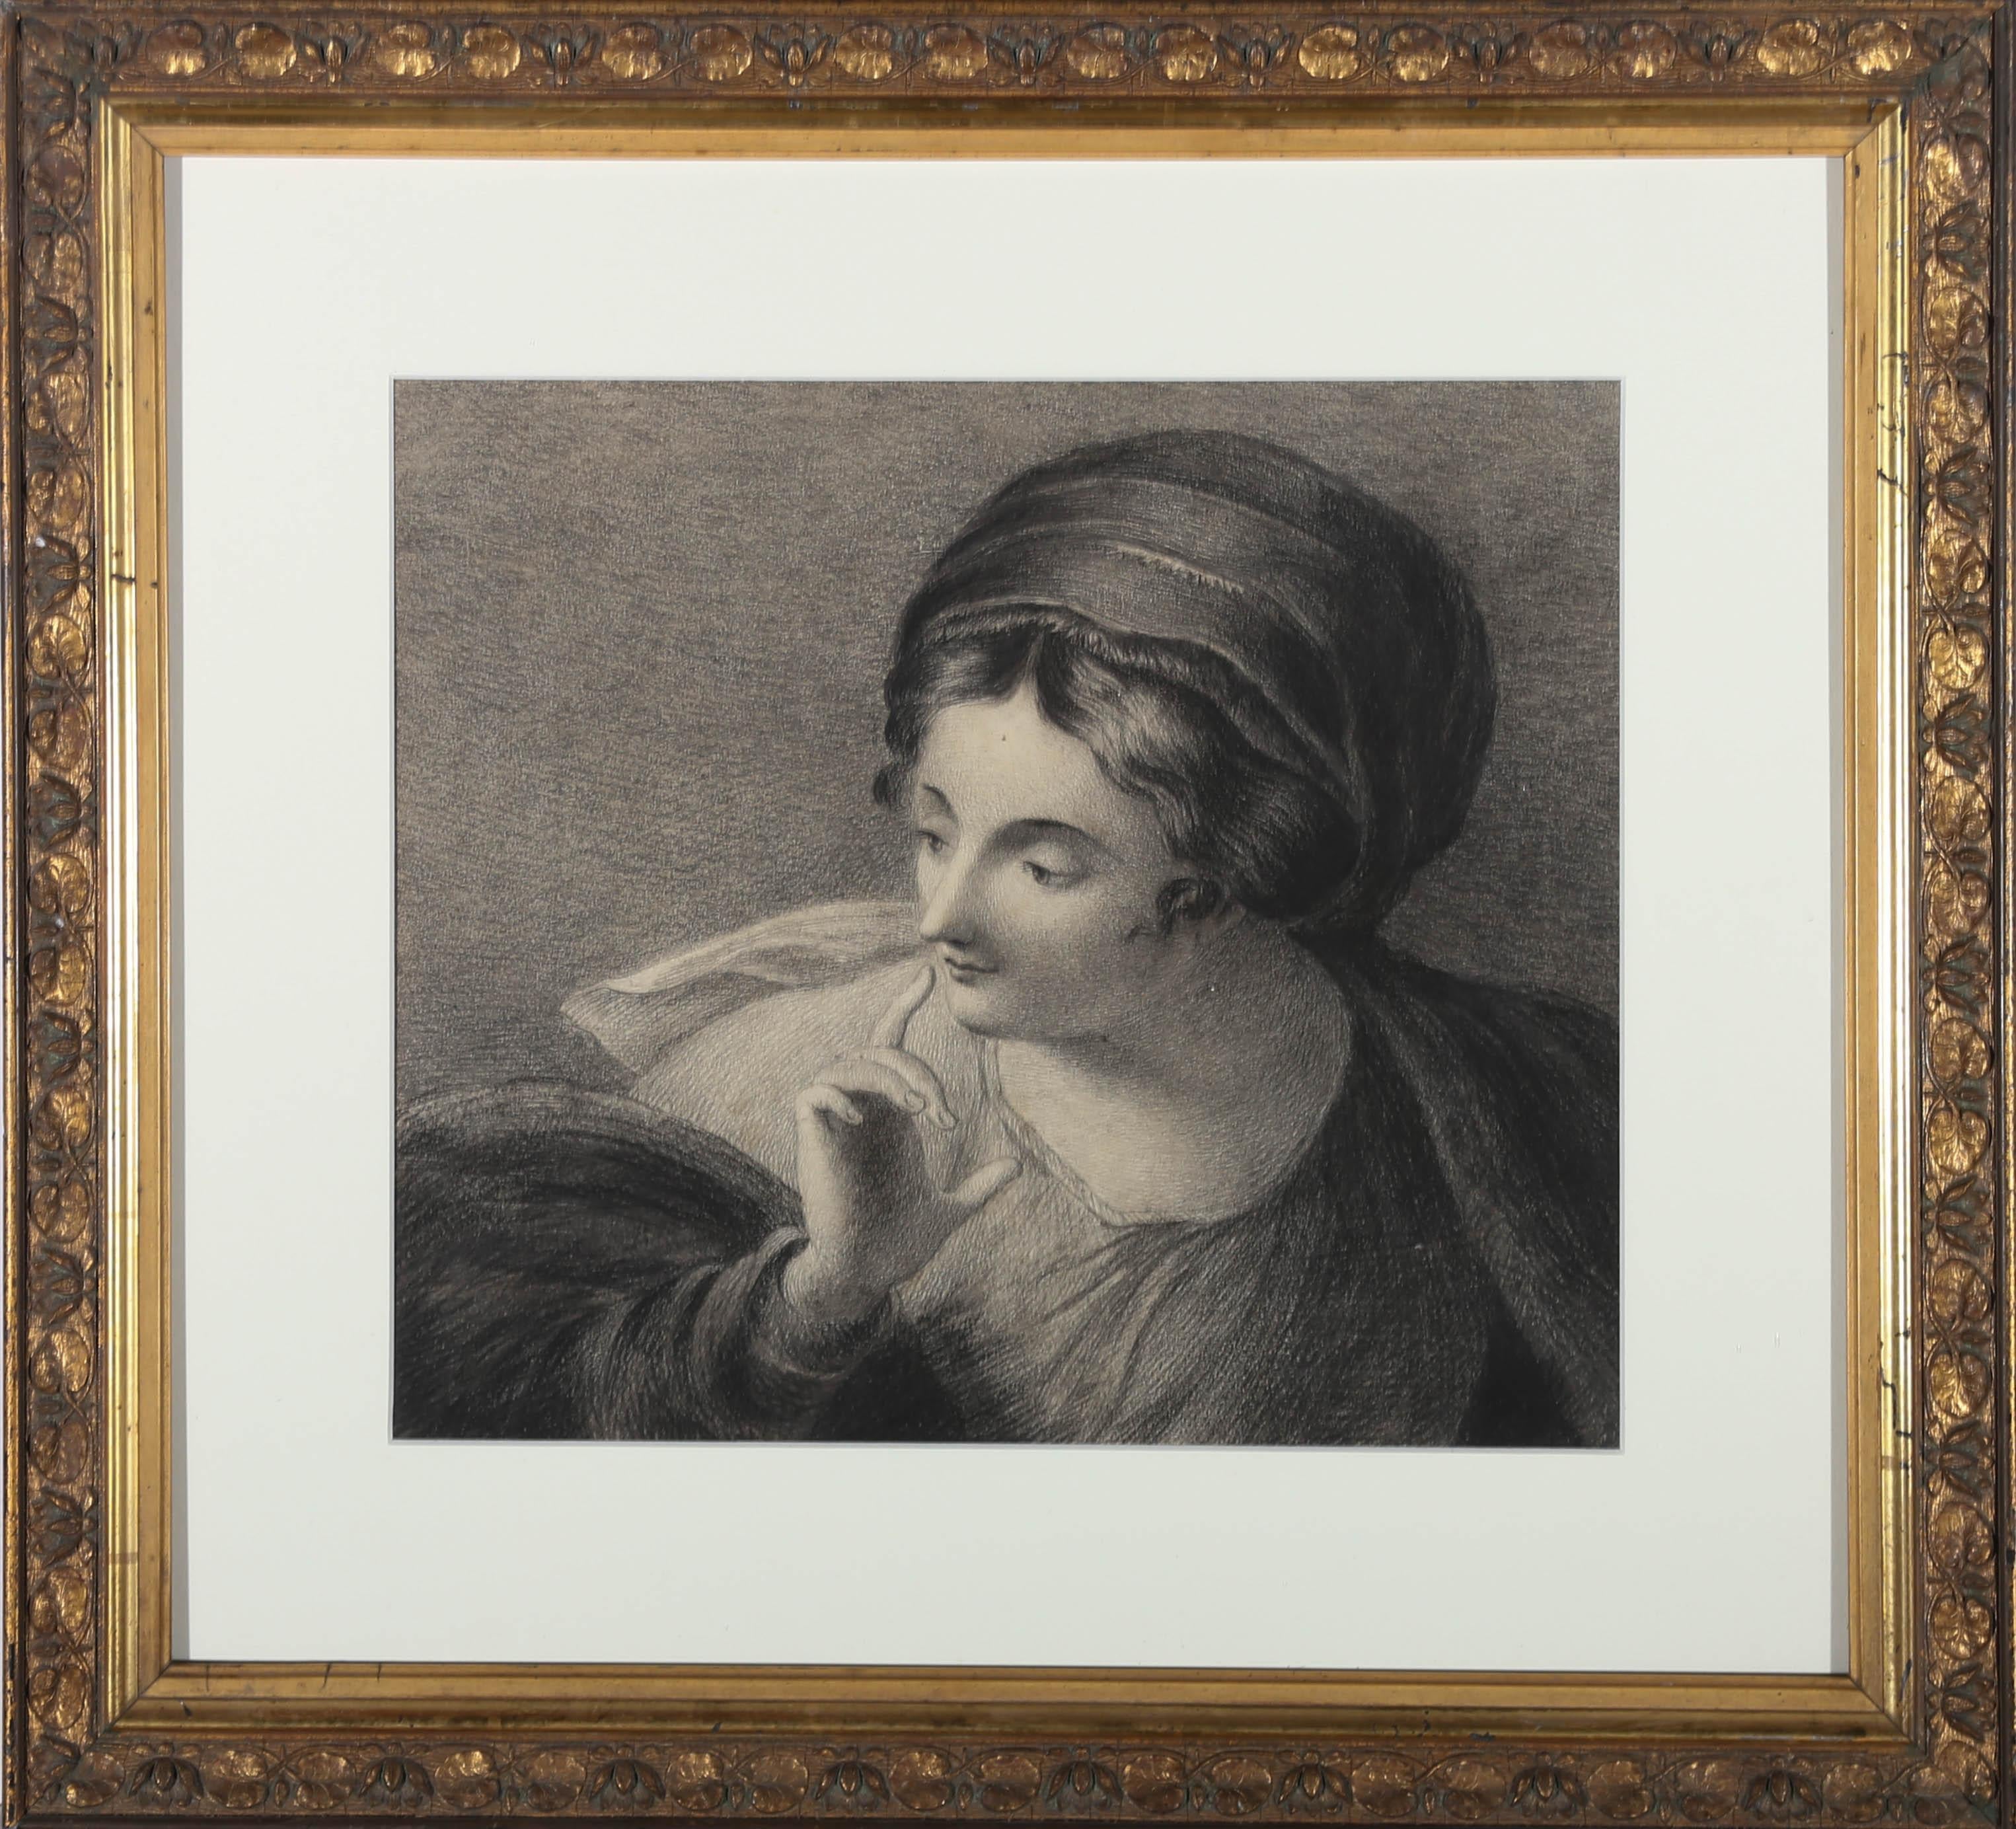 A very fine study of a young woman in classical Greek dress. The artist has captured the subject with a look of intrigue, her hand raised as if pondering a question. Very finely presented in a gilt effect frame with a white card mount. The original